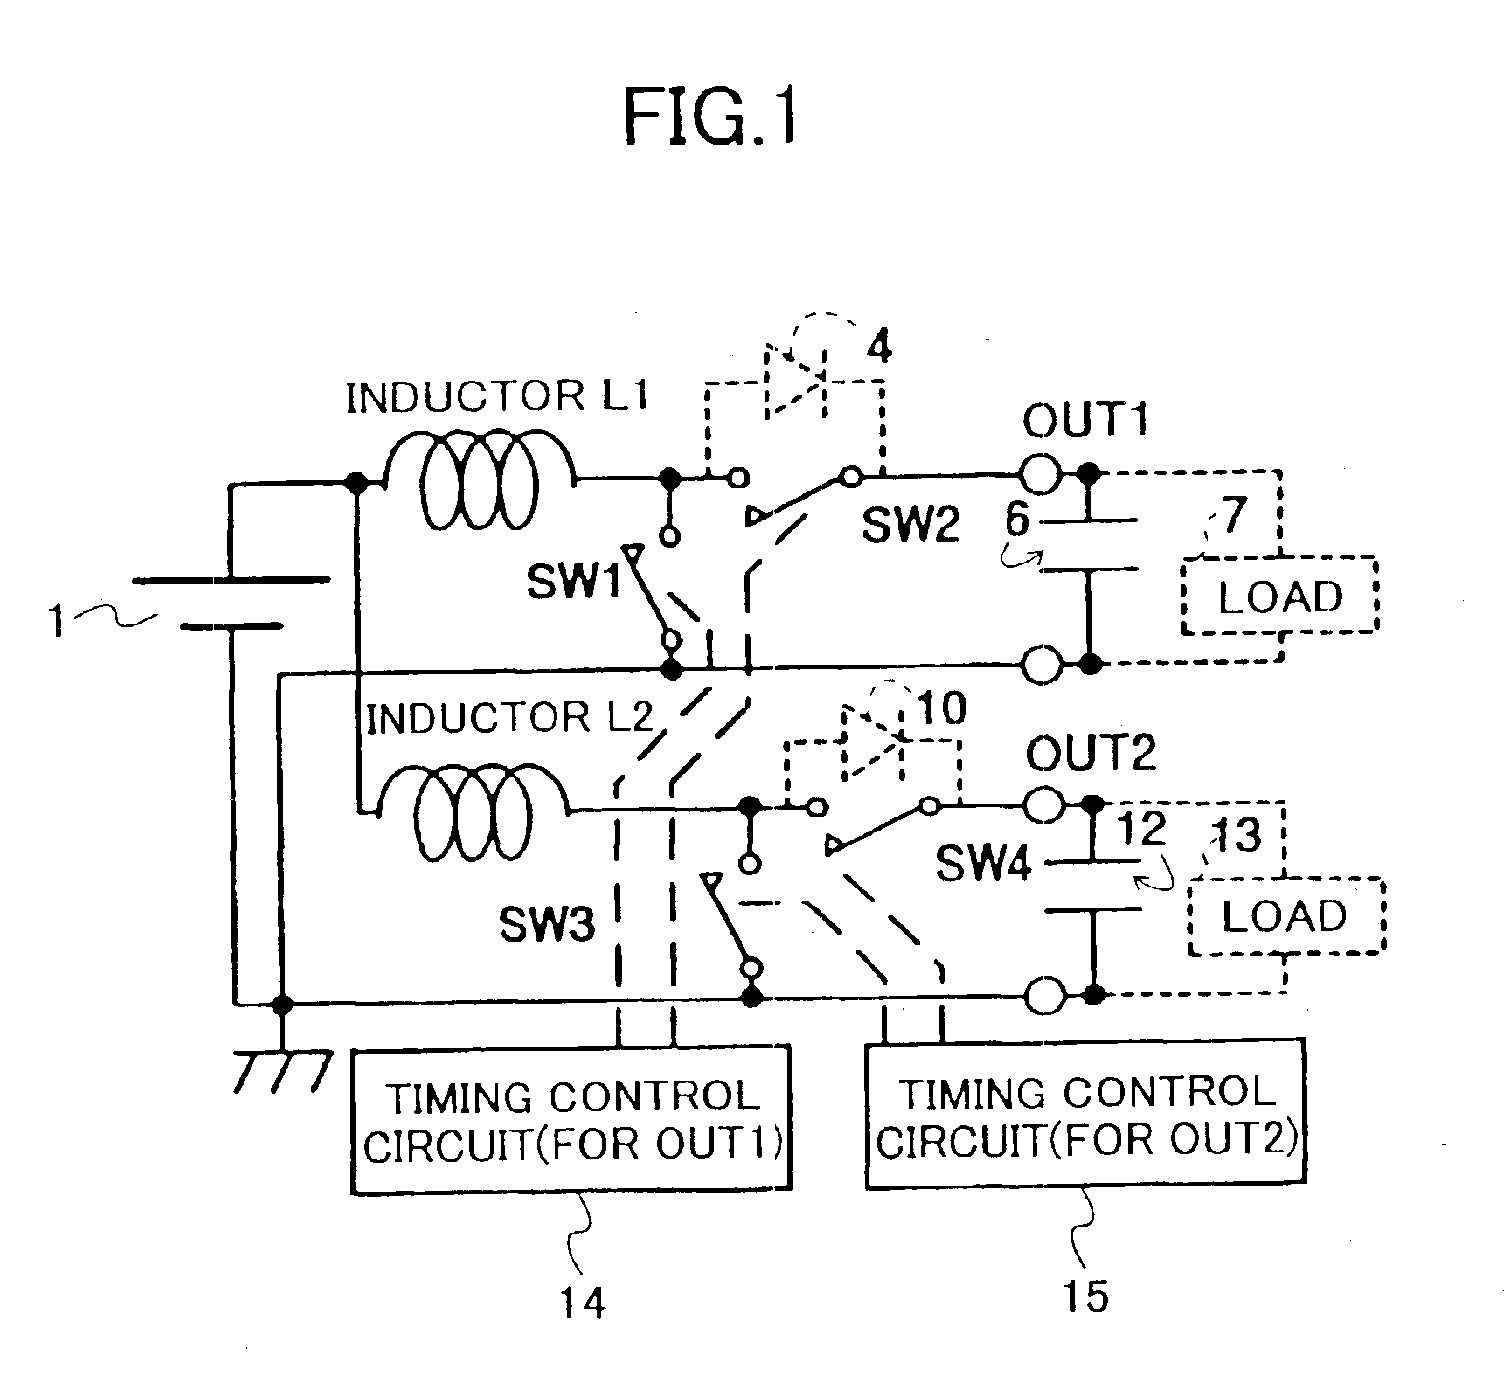 Switching regulator having two or more outputs